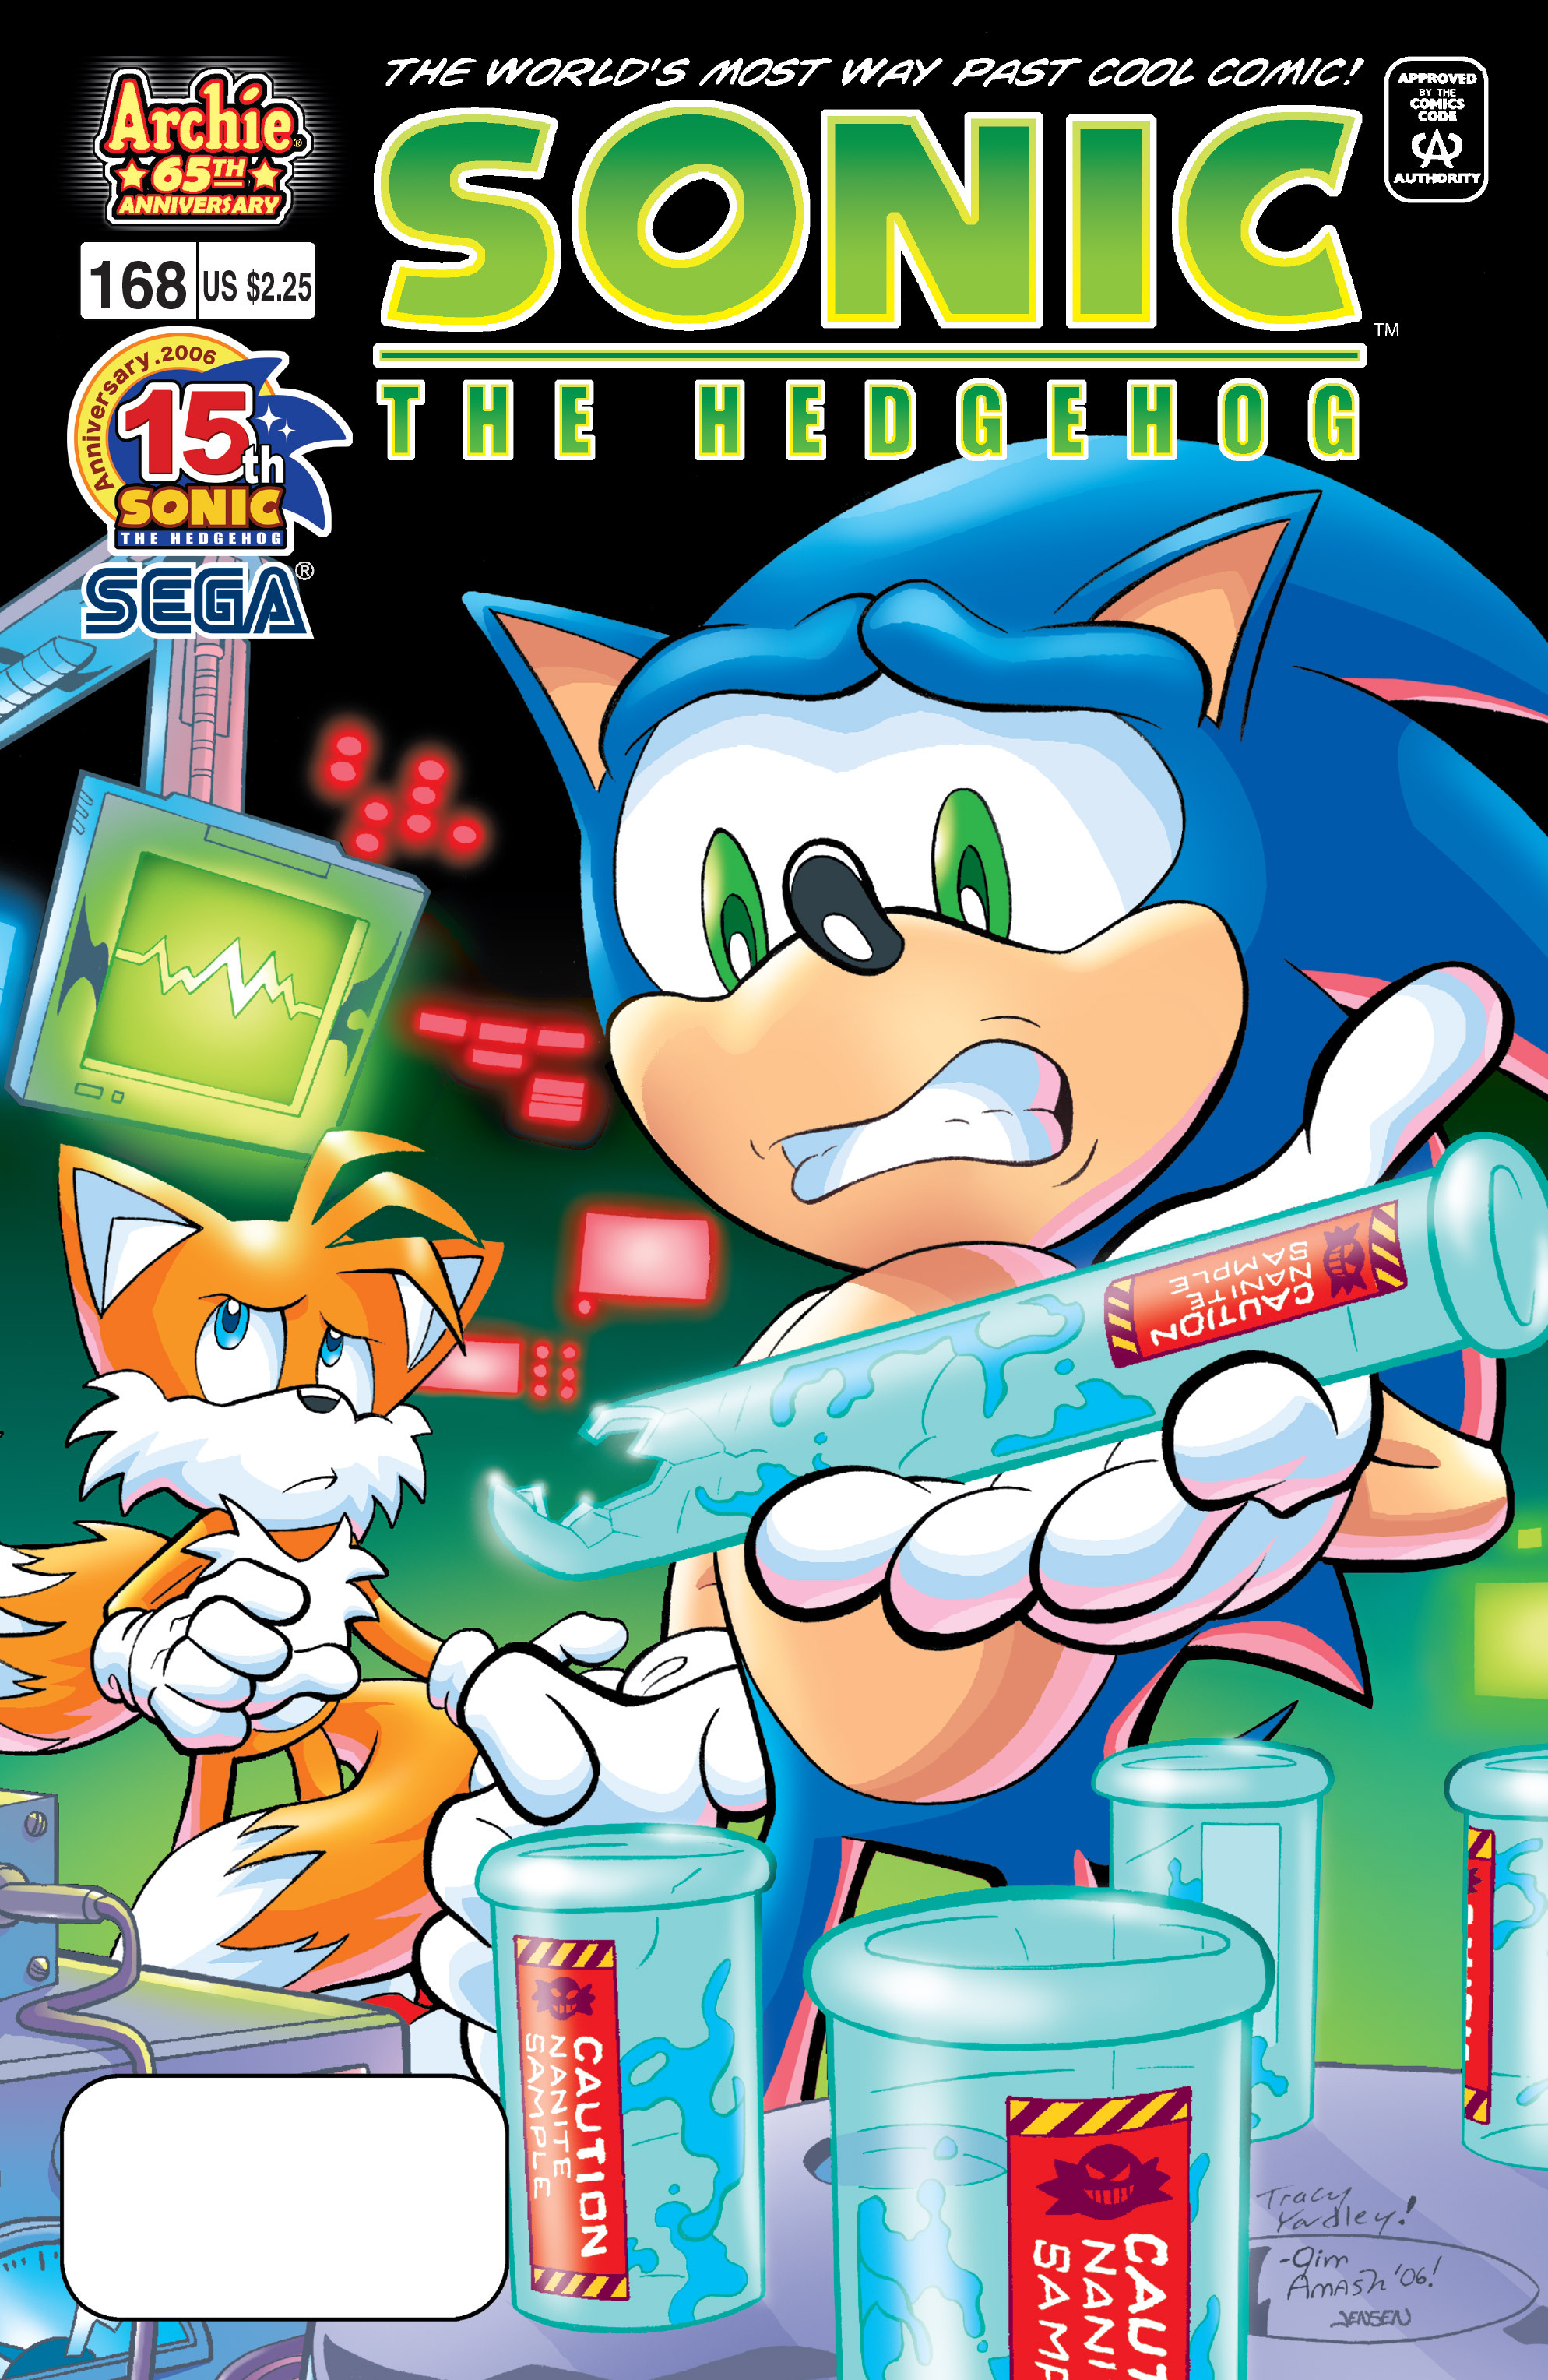 Archie Sonic the Hedgehog Issue 185 | Sonic News Network 